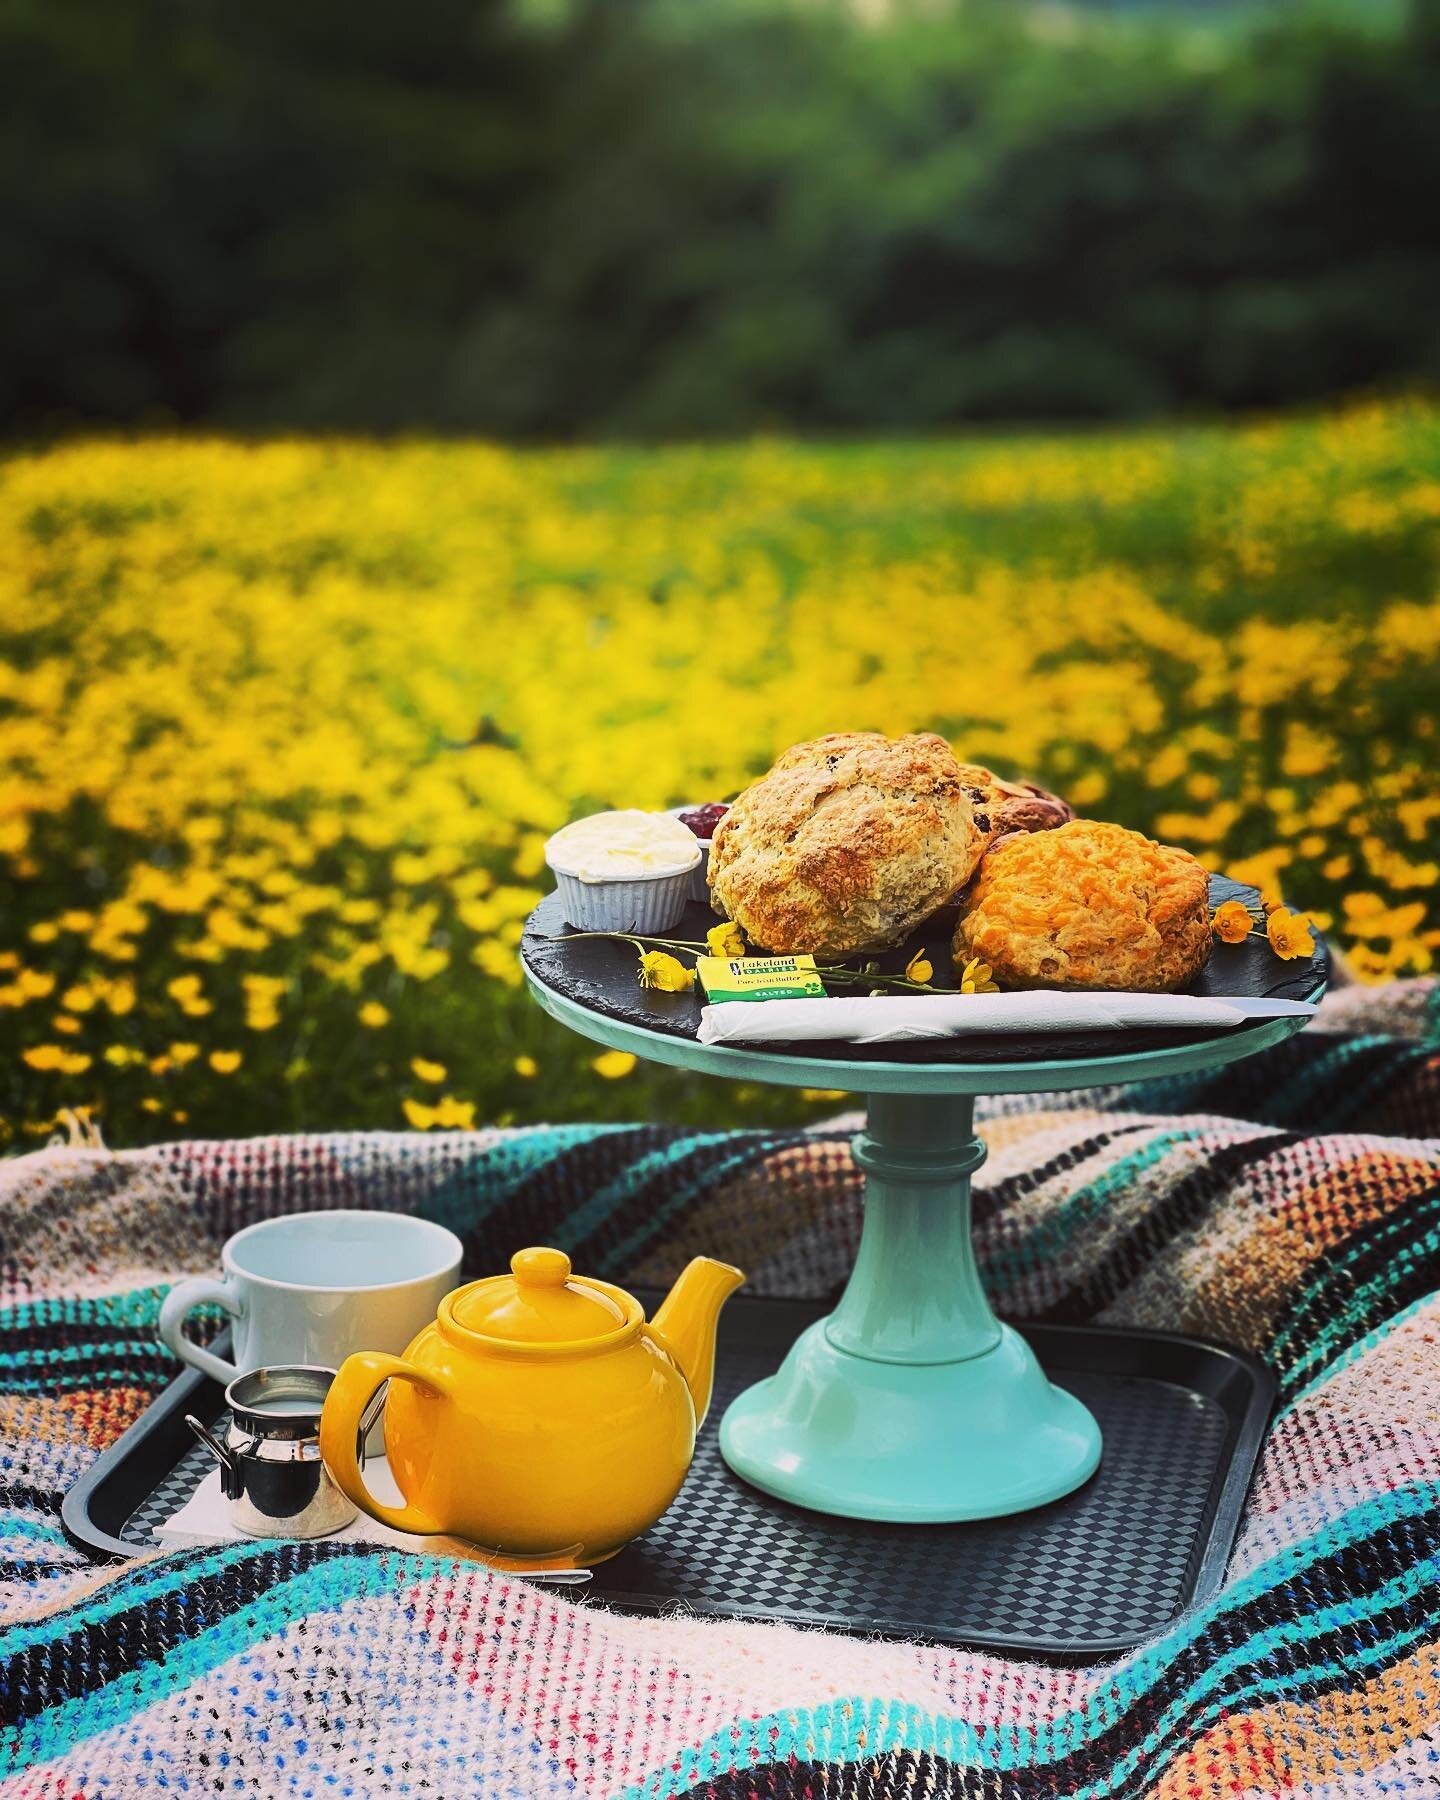 Why not come and enjoy a choice of scones up at the hub today?&hellip; We have Cheese, Fruit or Cherry and almond to offer! Delicious with a cup of tea! Make sure you hurry before they&rsquo;re scone. 🙂🐝🌼🌻☀️ #yorkshire #scones #buttercup #summer 